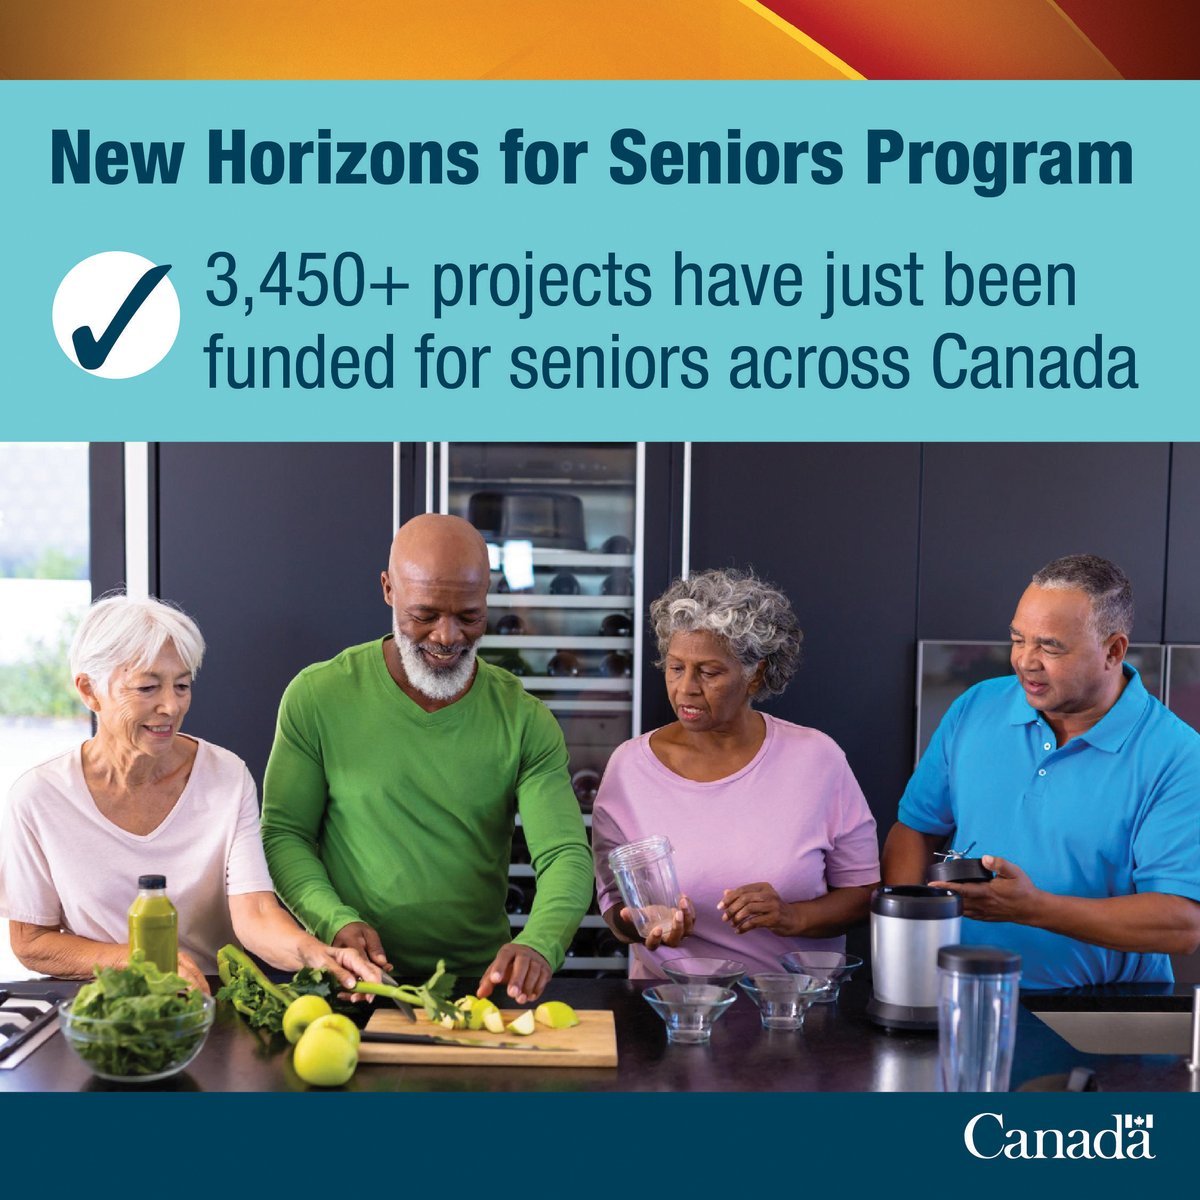 🎉Over 3,450 community-based projects supporting seniors just received $70 million in funding! The #NewHorizonsForSeniors Program will continue to make an impact across #Canada! 🔗 ow.ly/XfvR50RIRIH